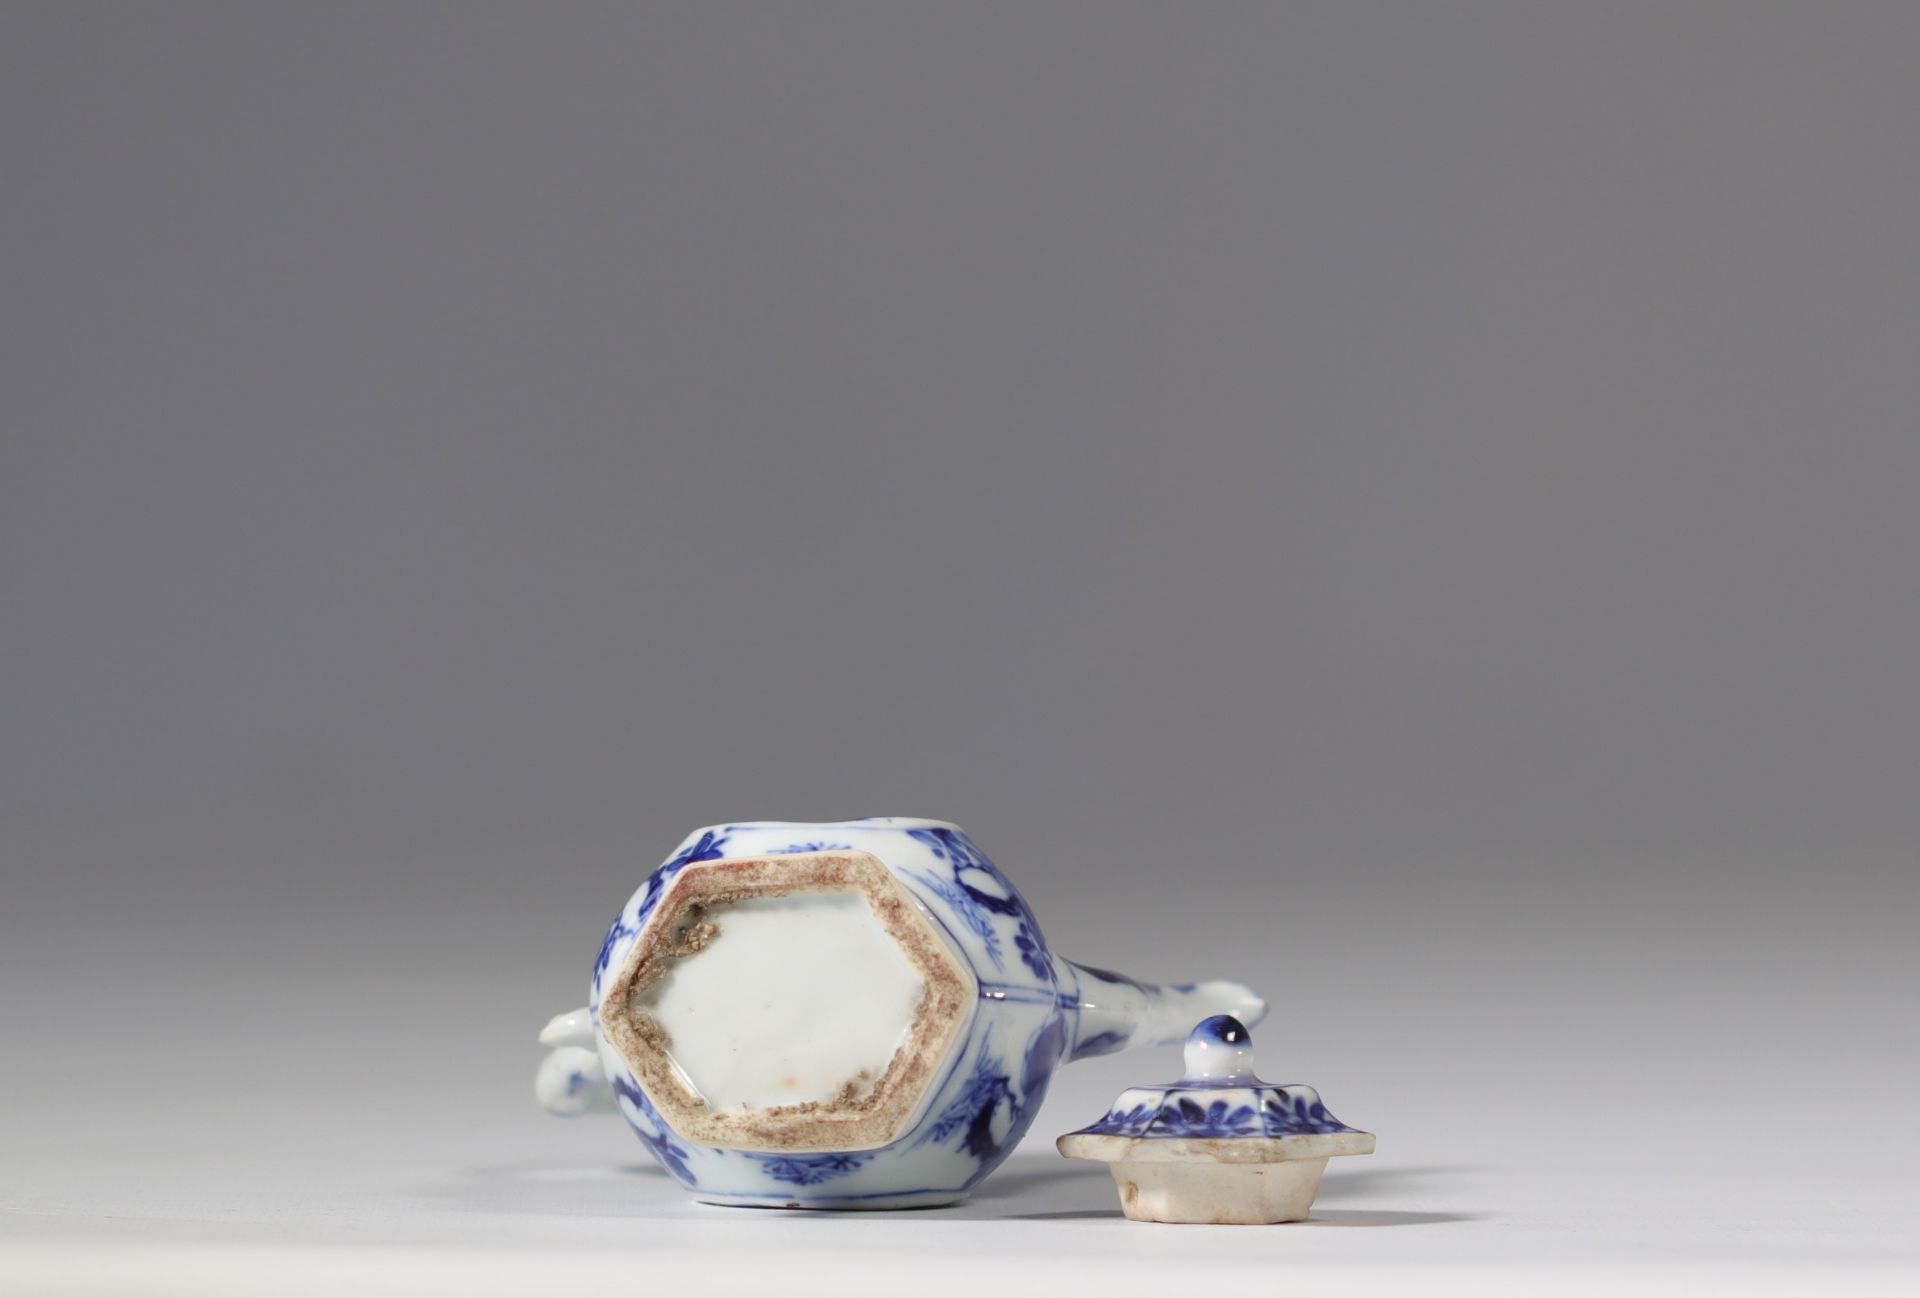 White and blue porcelain teapot with floral decoration from the 17th century Kangxi - Image 4 of 4